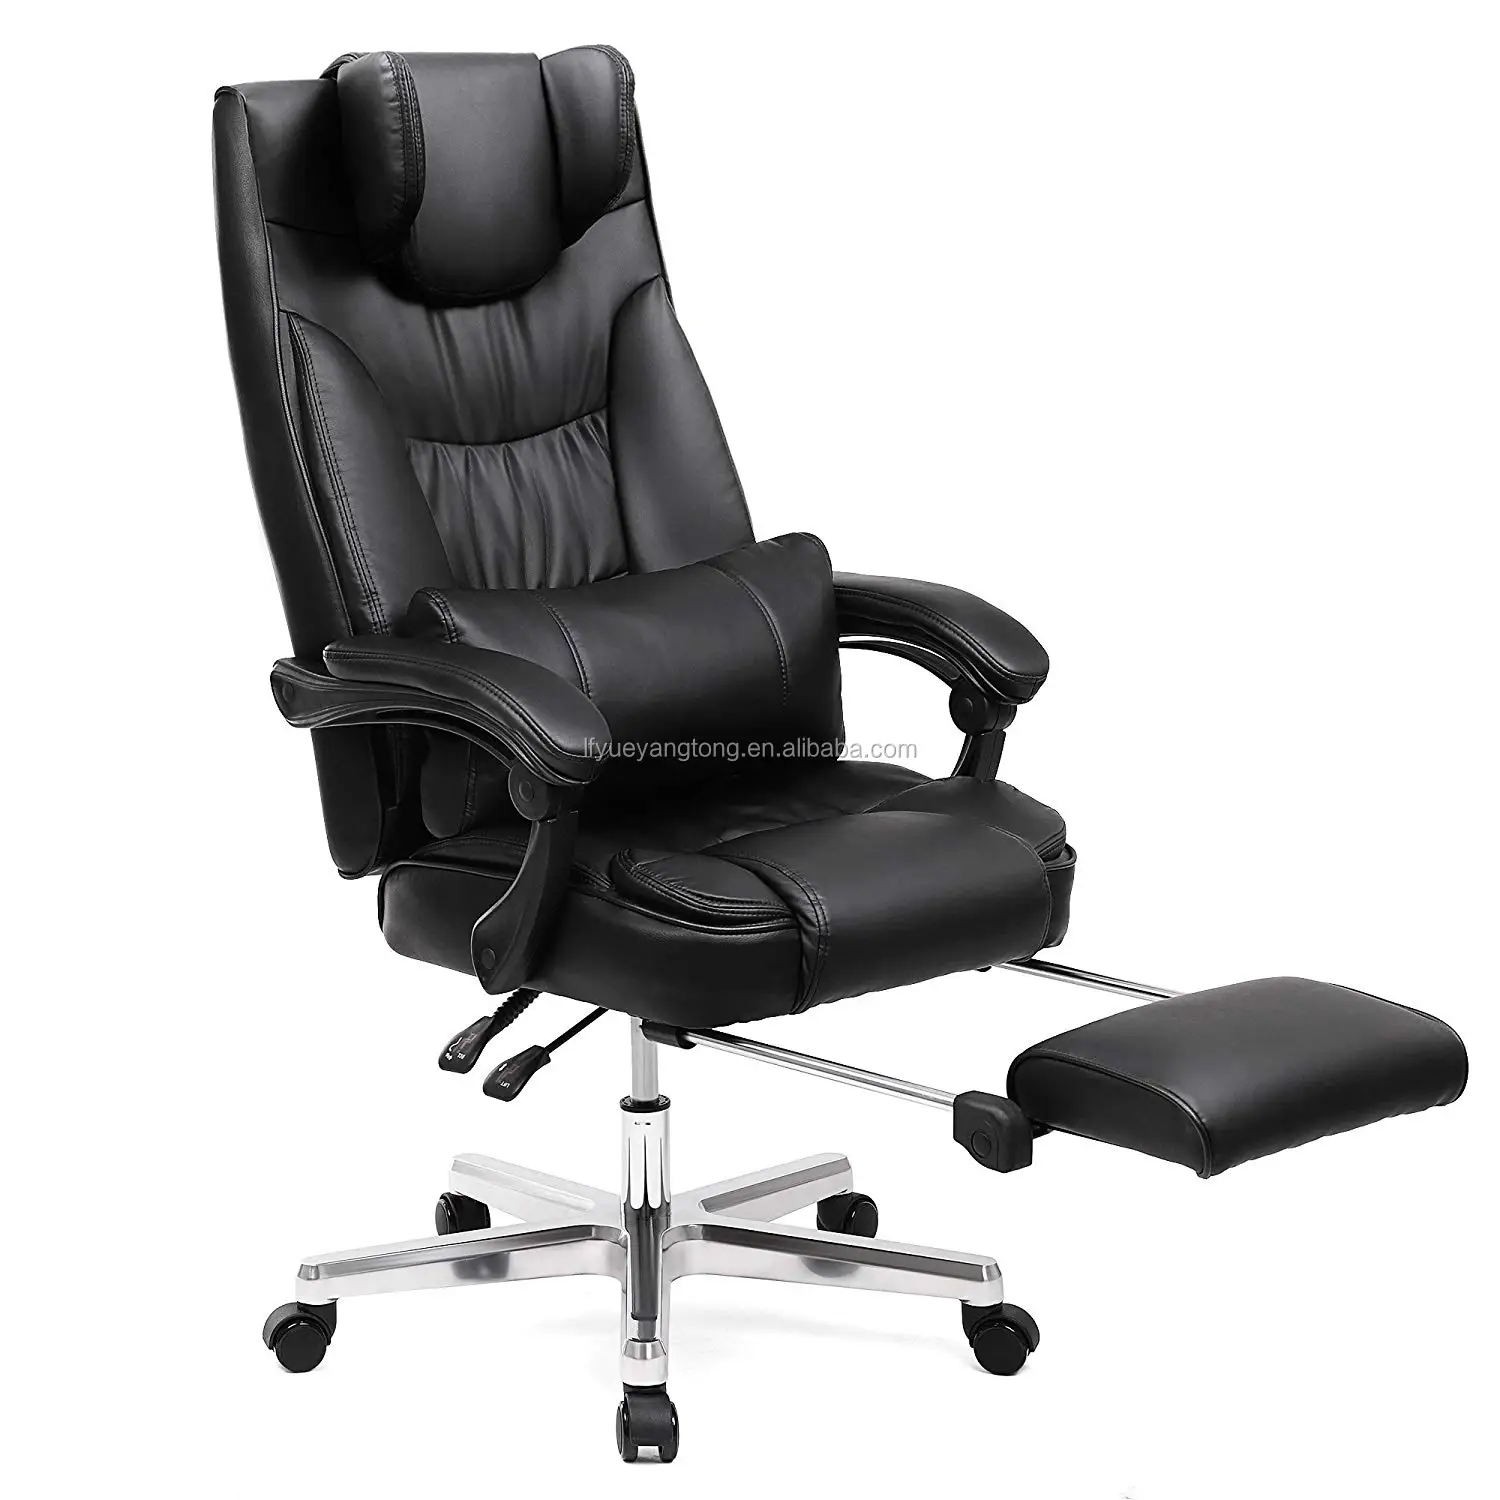 ergonomic executive chair with foldable headrest reclining office chair   buy executive swivel office chairergonomic computer office chair with